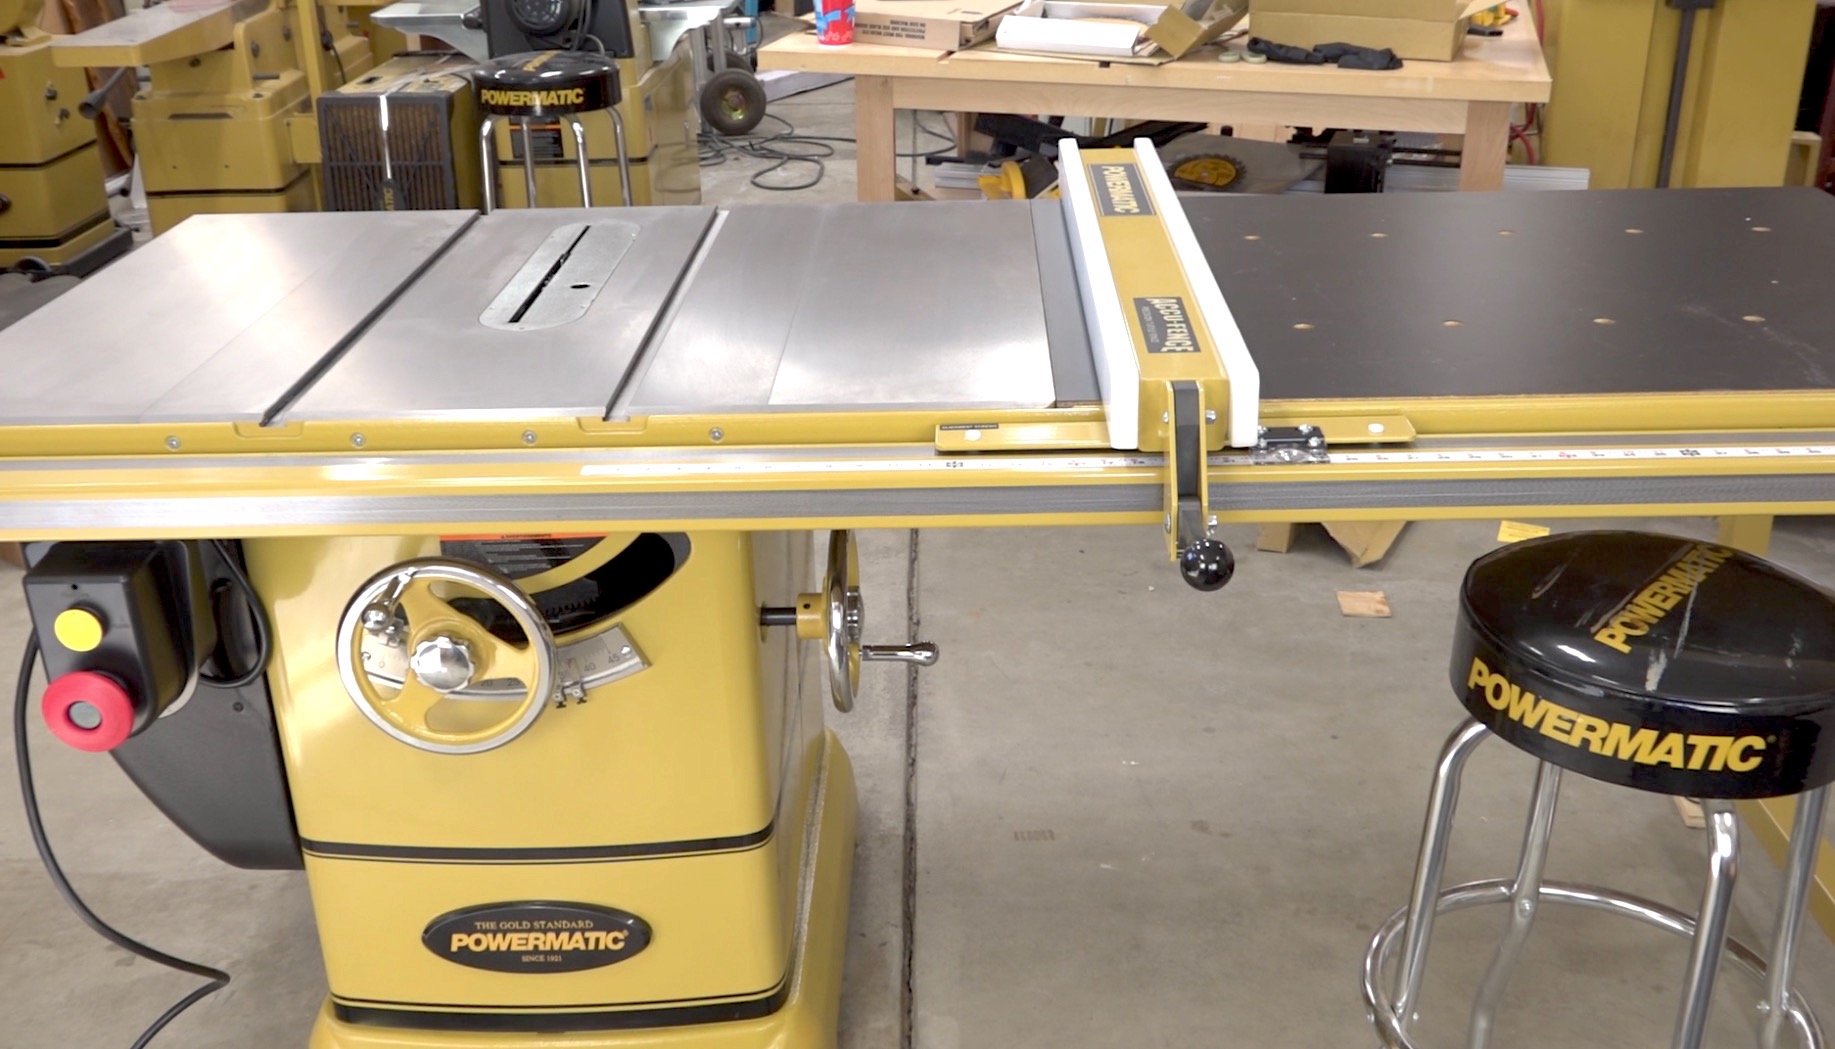 Assembly of a PM2000 Table Saw - New PM2000